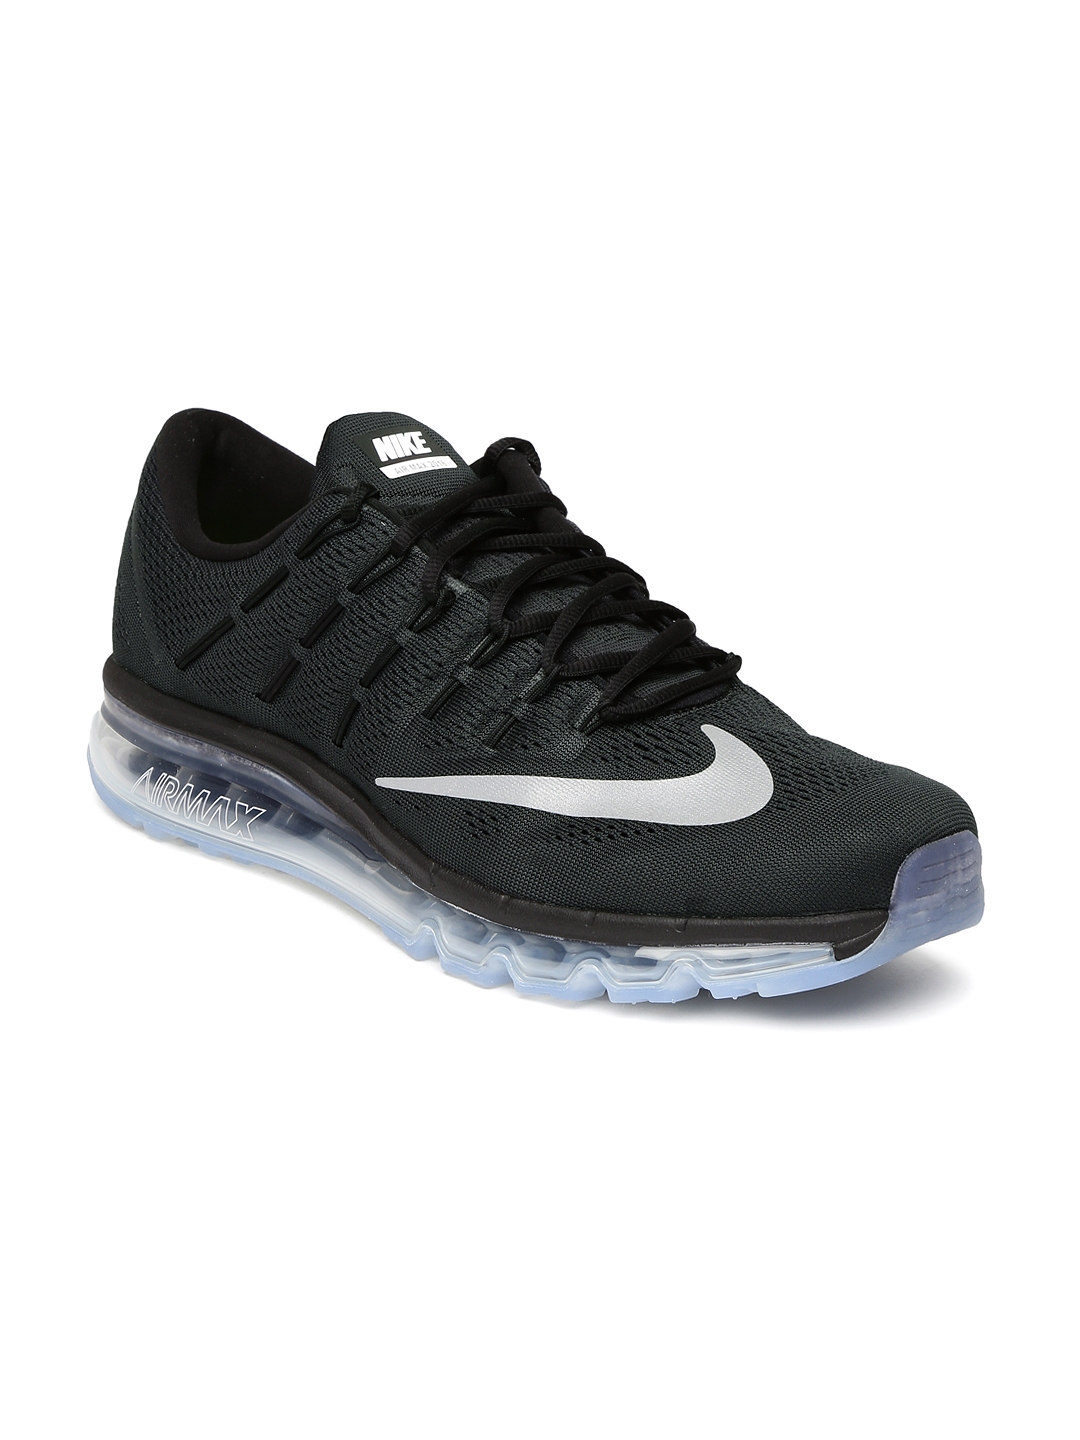 Buy Nike Men Black Air Max 2016 Running Shoes - Sports Shoes for Men ...